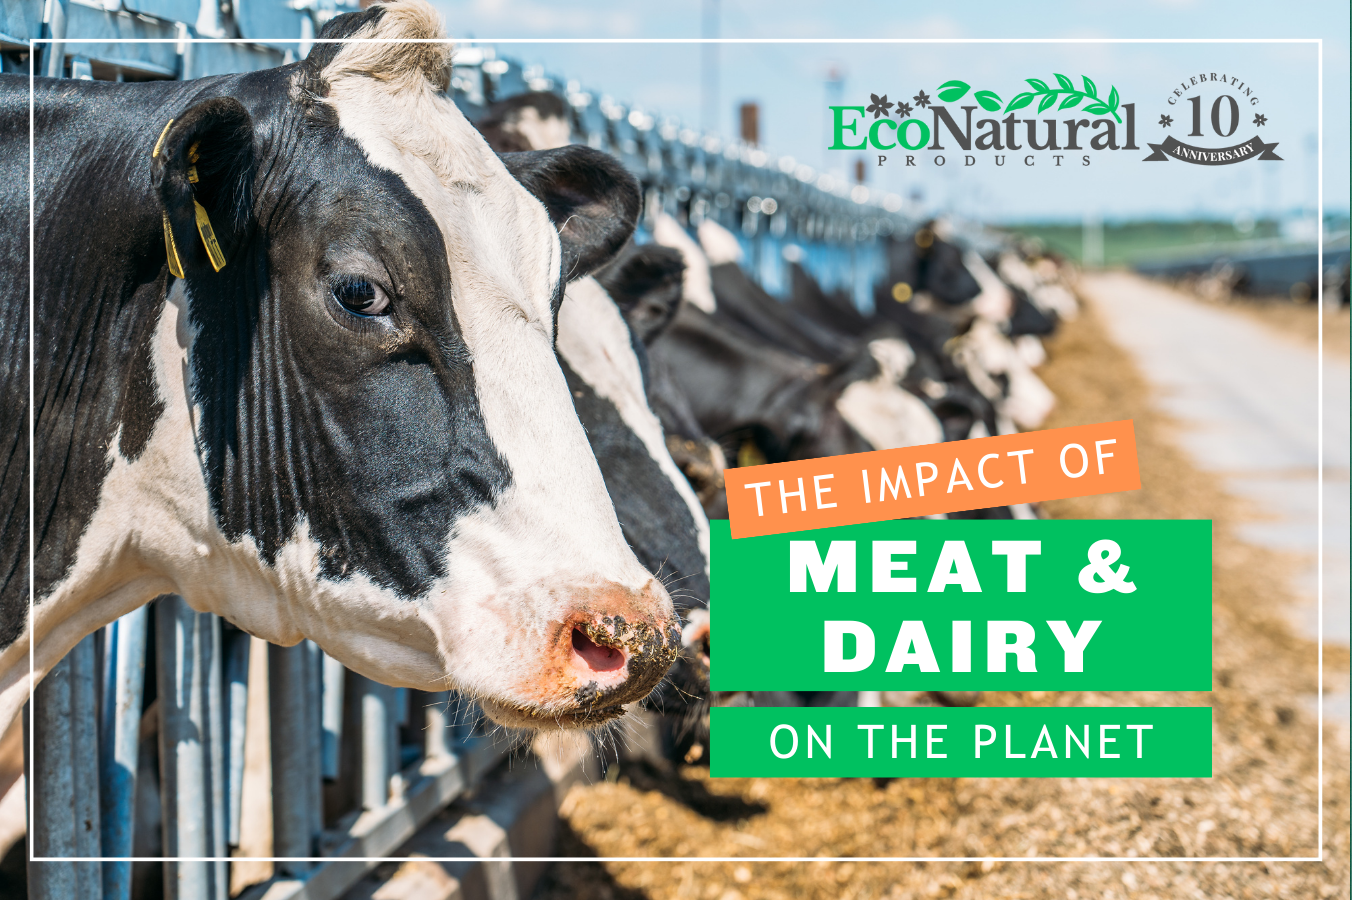 The impact of meat and dairy on the planet